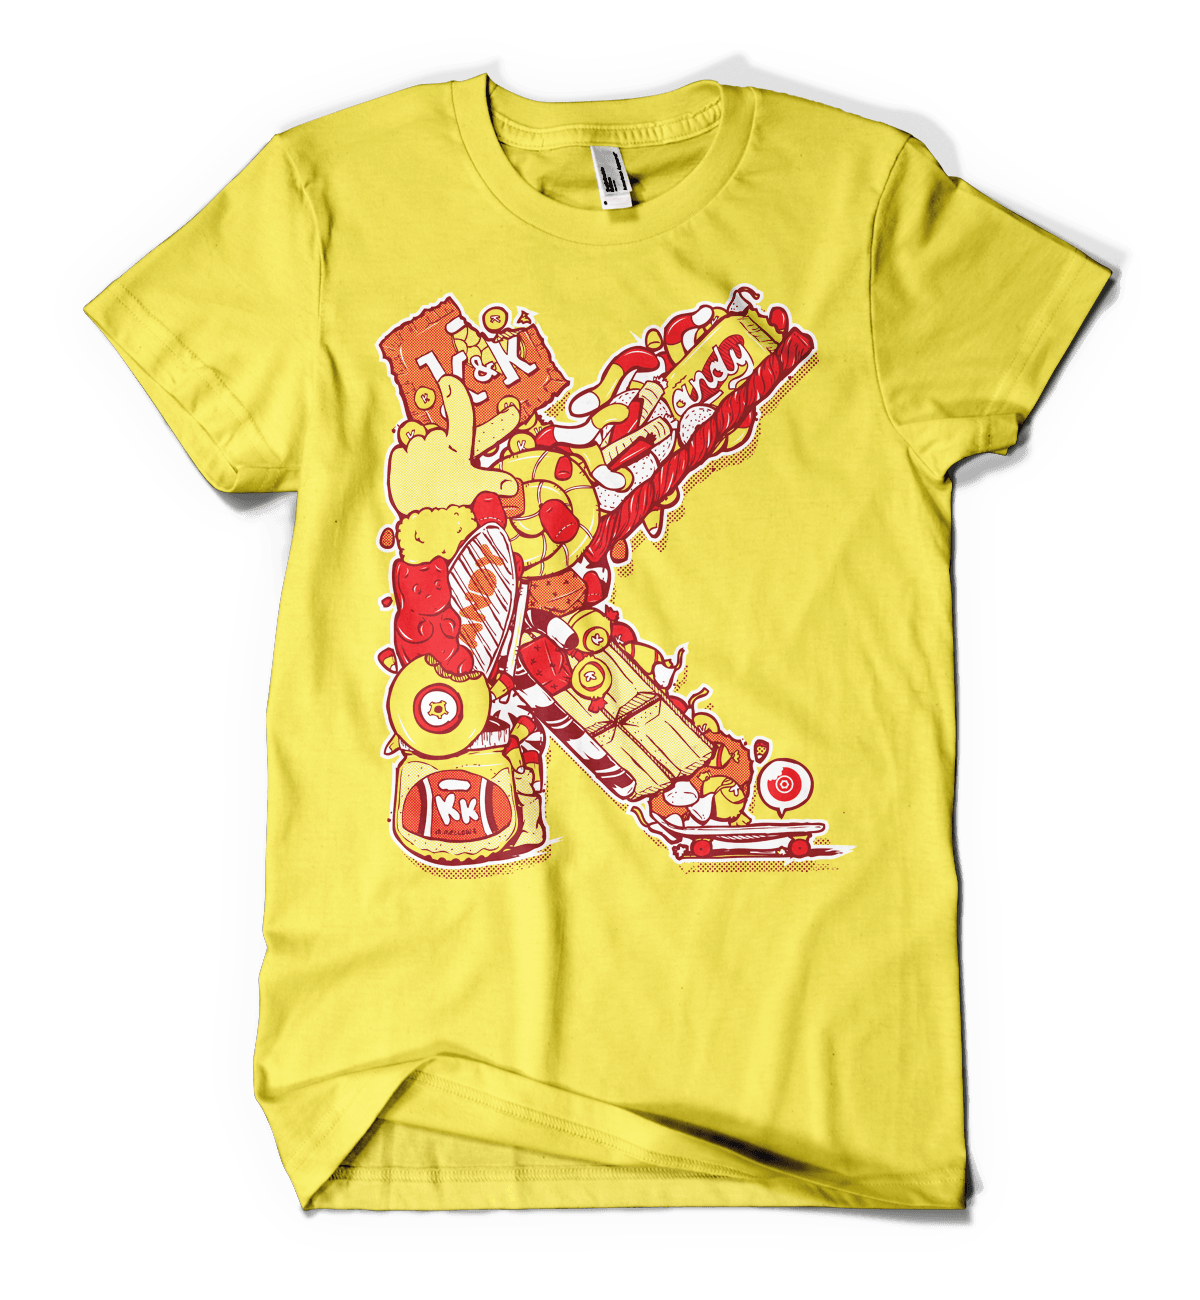 letters collage Candy kandy kruiser tee shirt